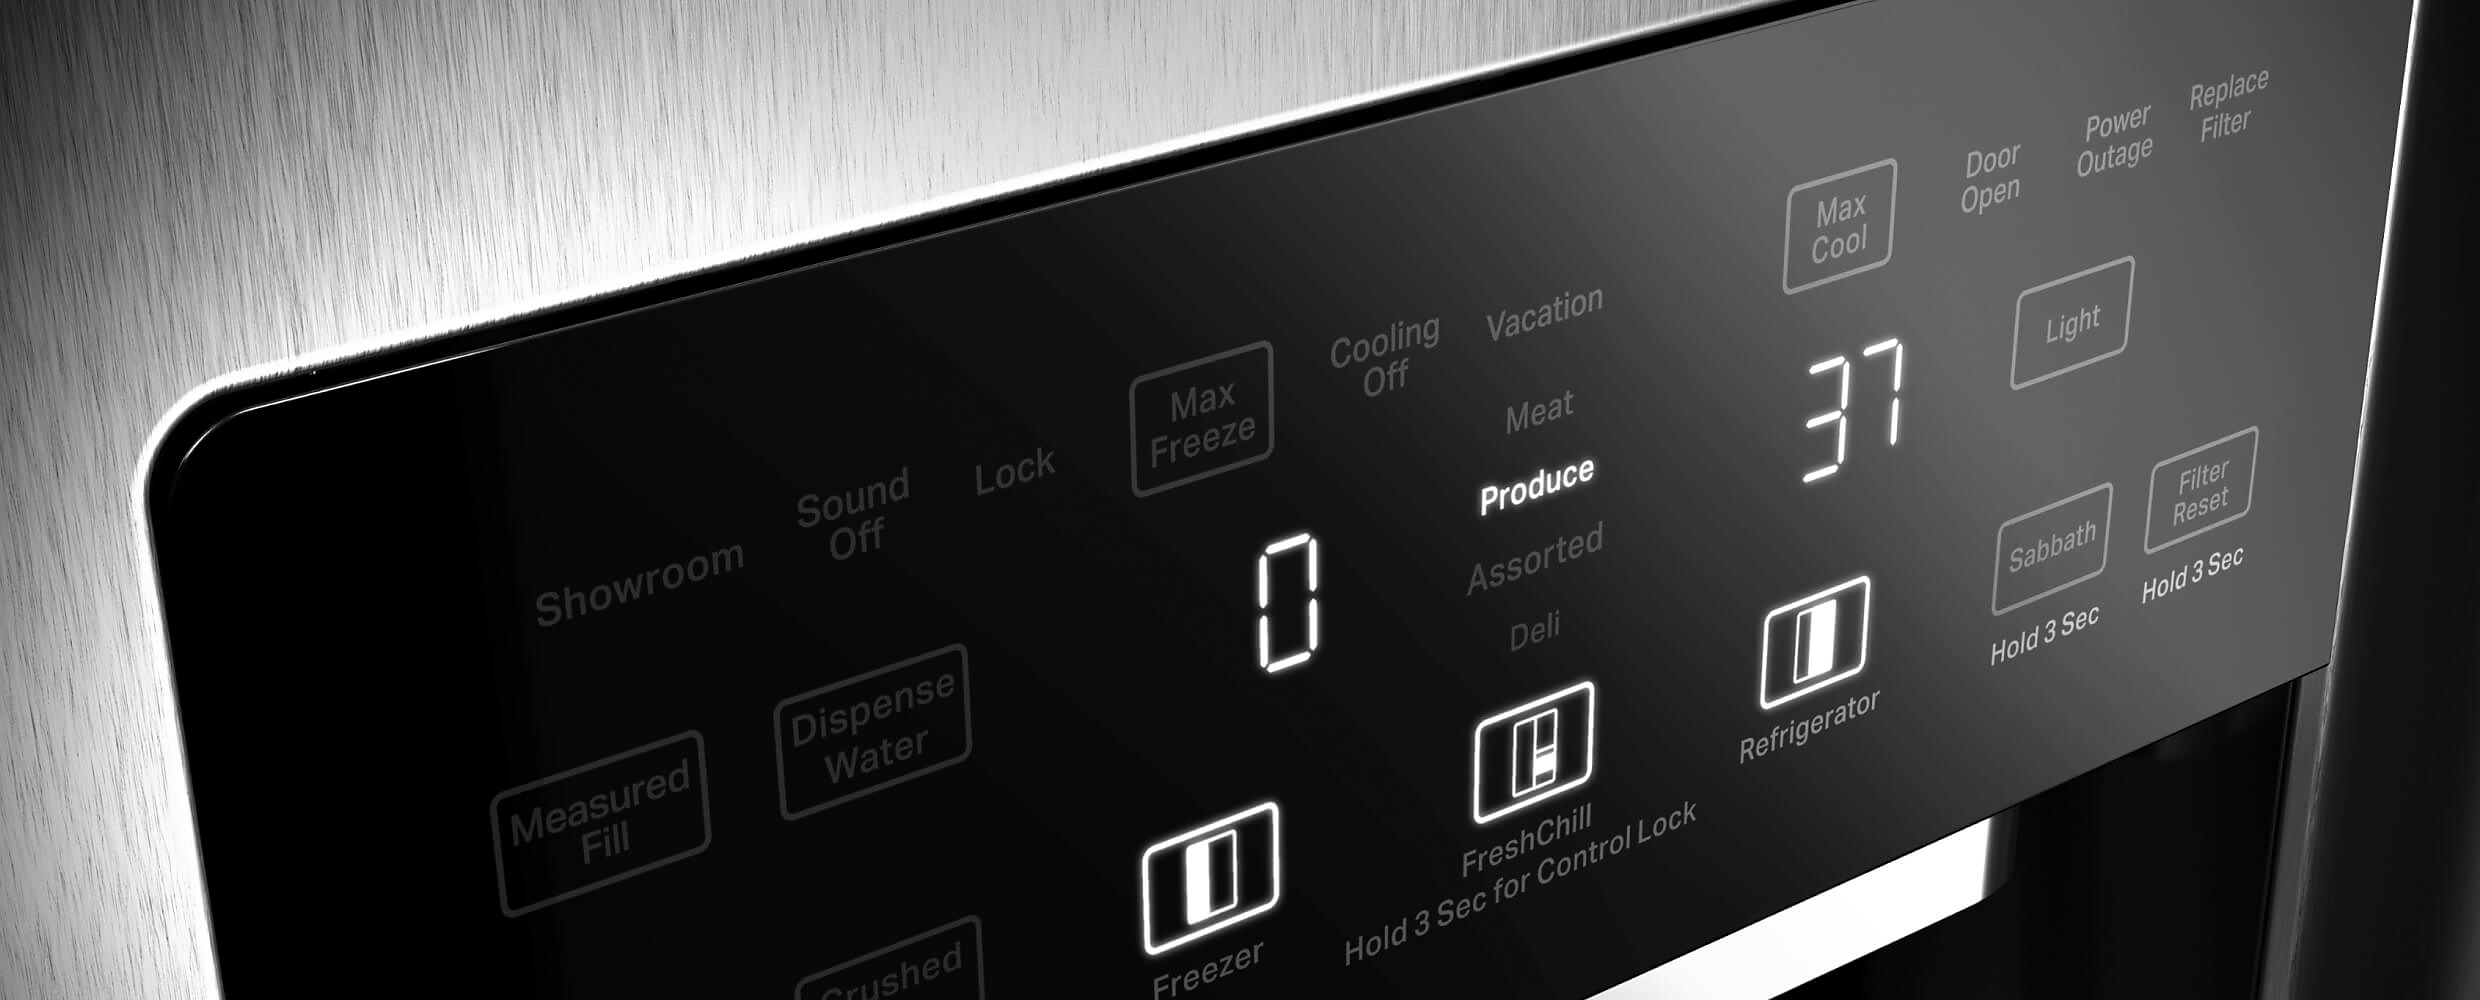 External Touchscreen Controls on the 48" KitchenAid® Built-In Side-by-Side Refrigerator